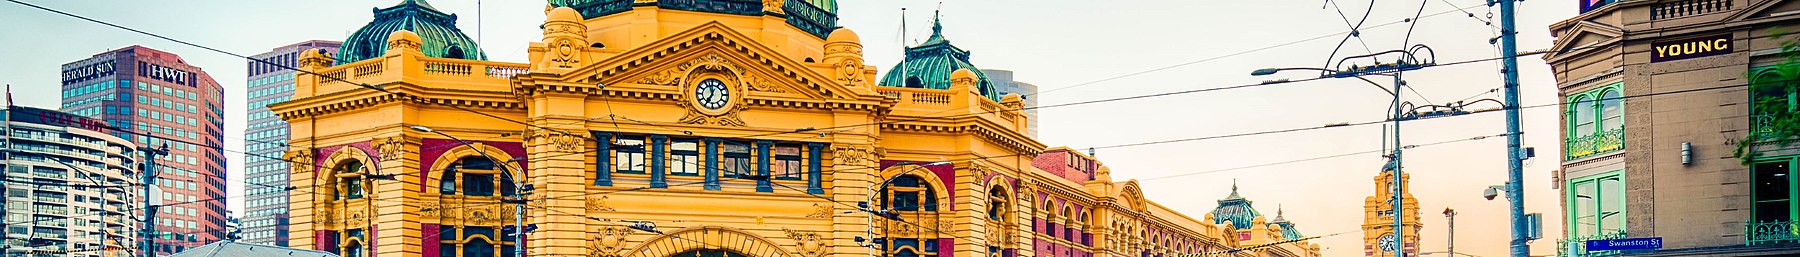 Flinders Street Station at the Swanston and Flinders intersection in the city